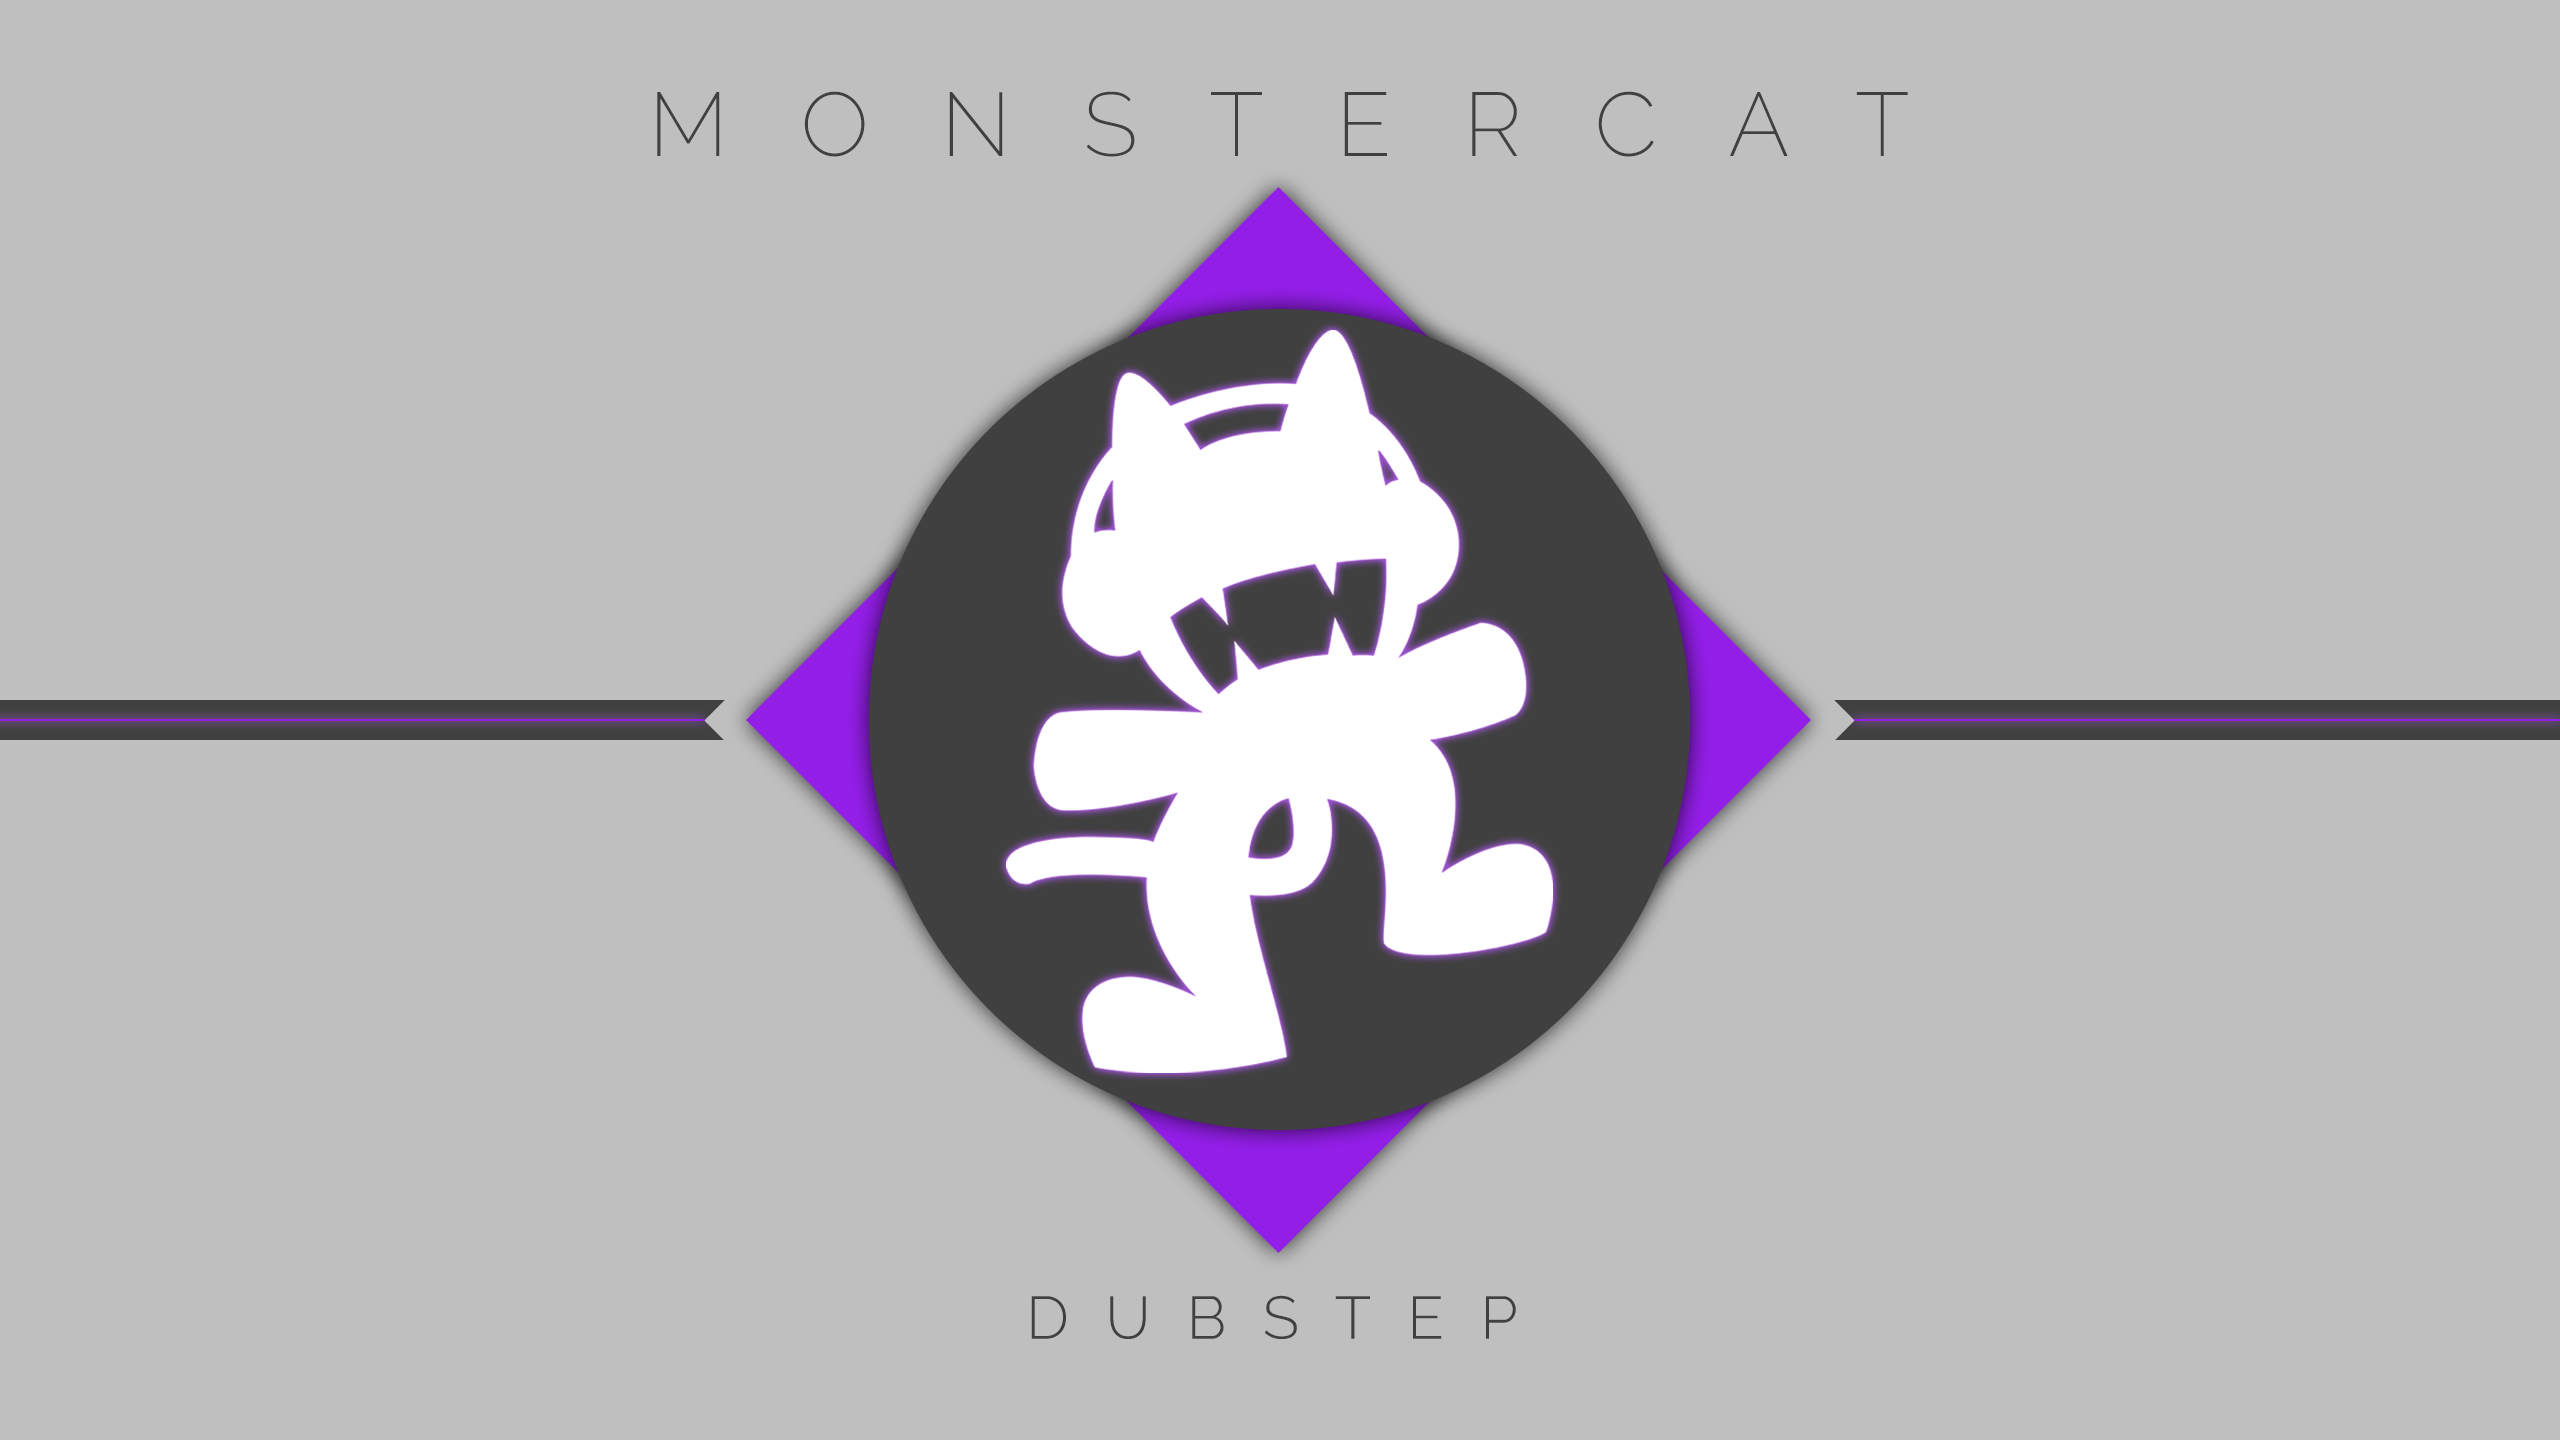 General 2560x1440 Monstercat dubstep simple background logo music gray background Record label purple